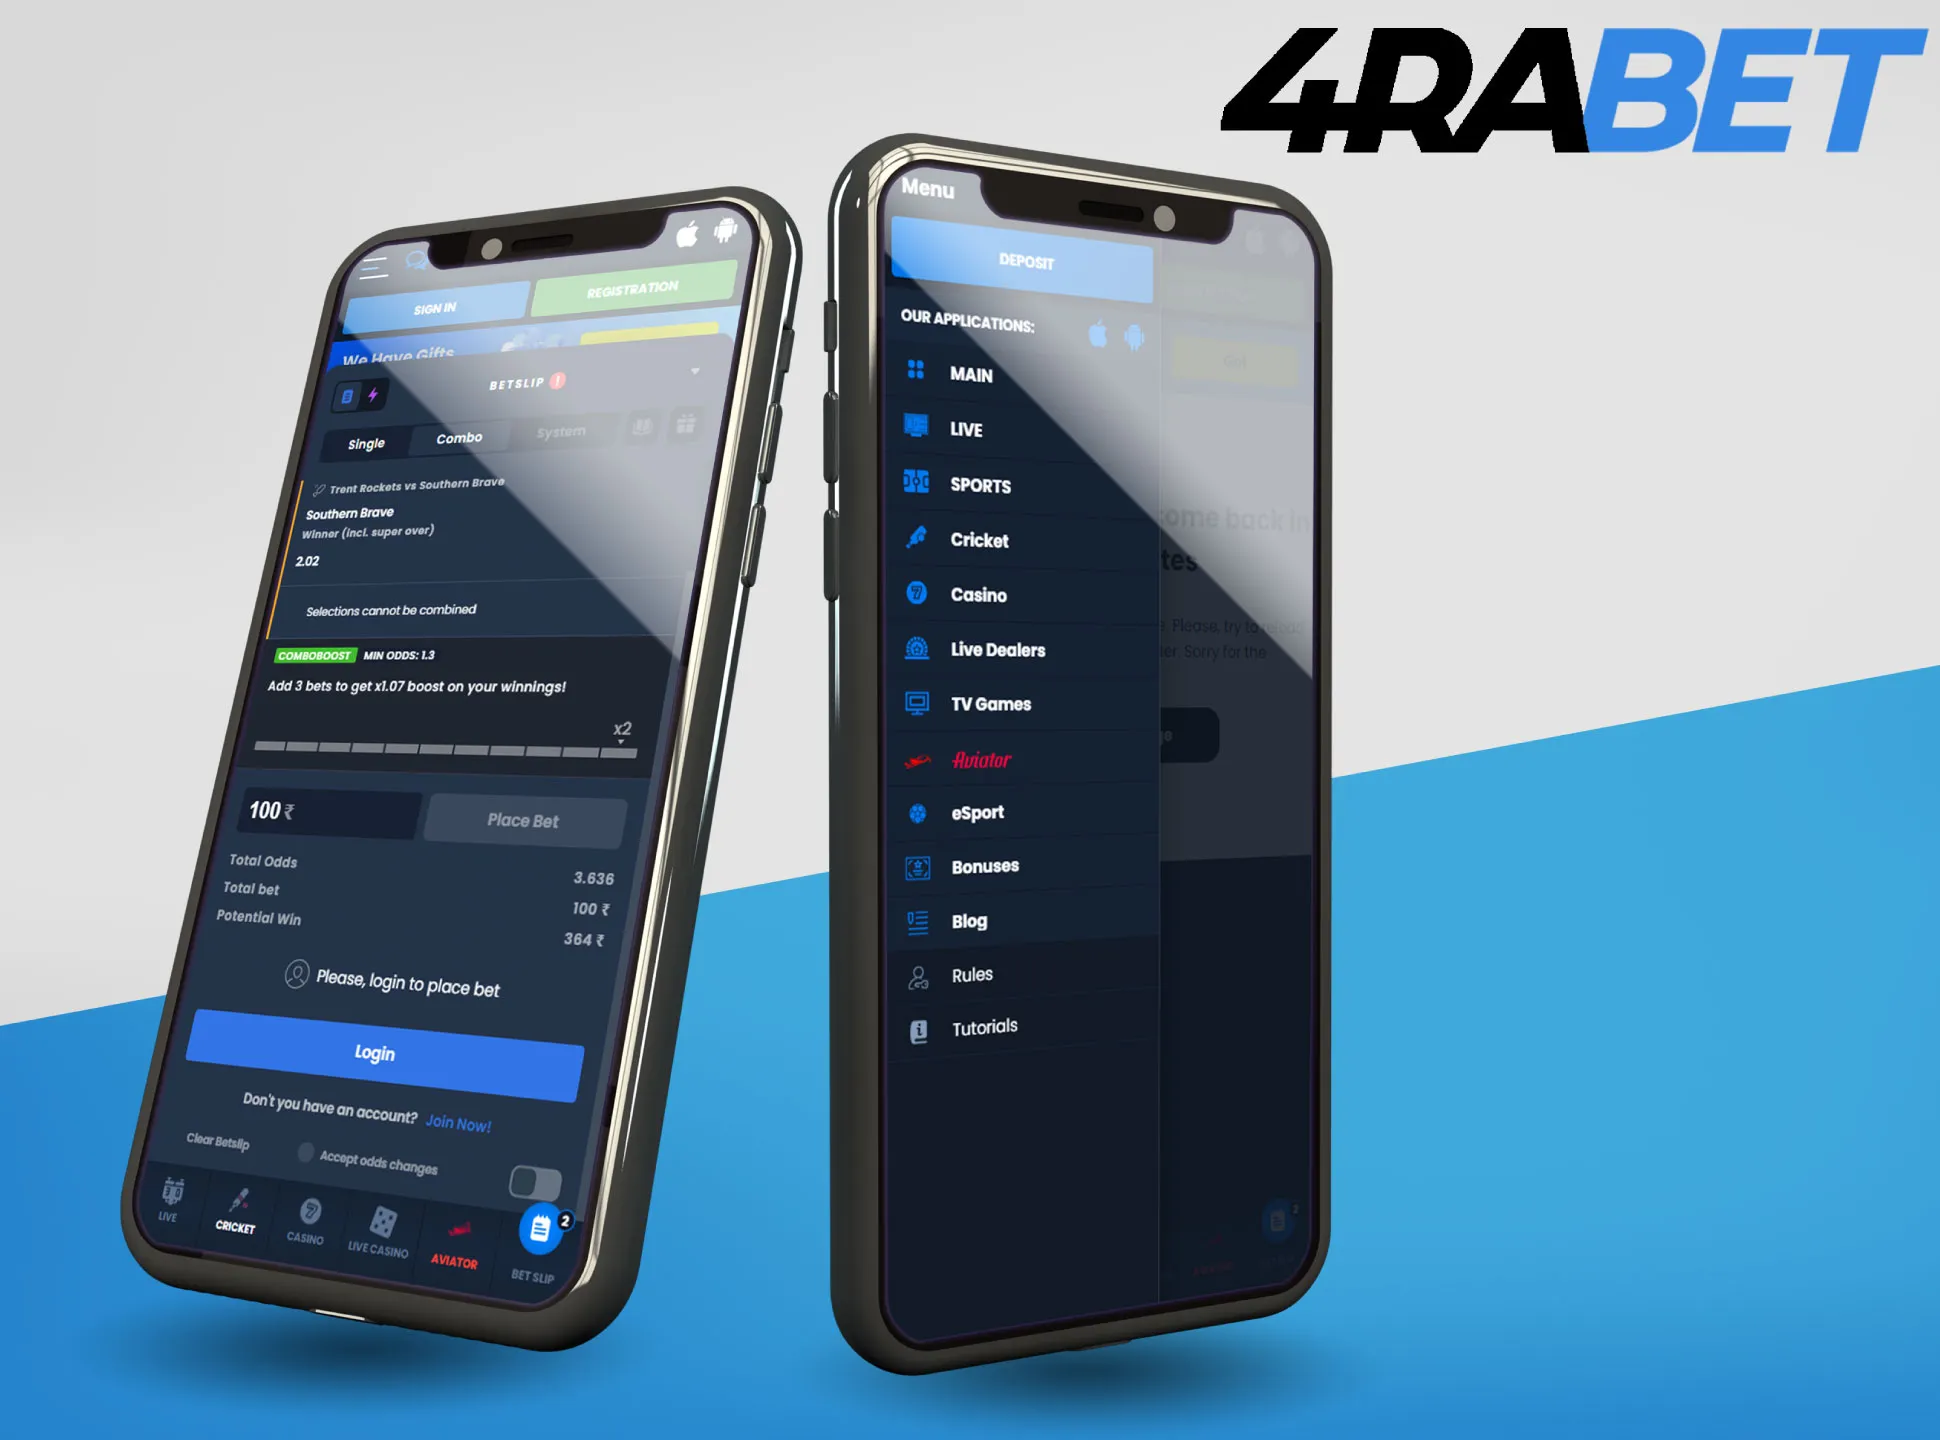 The 4rabet app is a great option to place bets whenever you want.